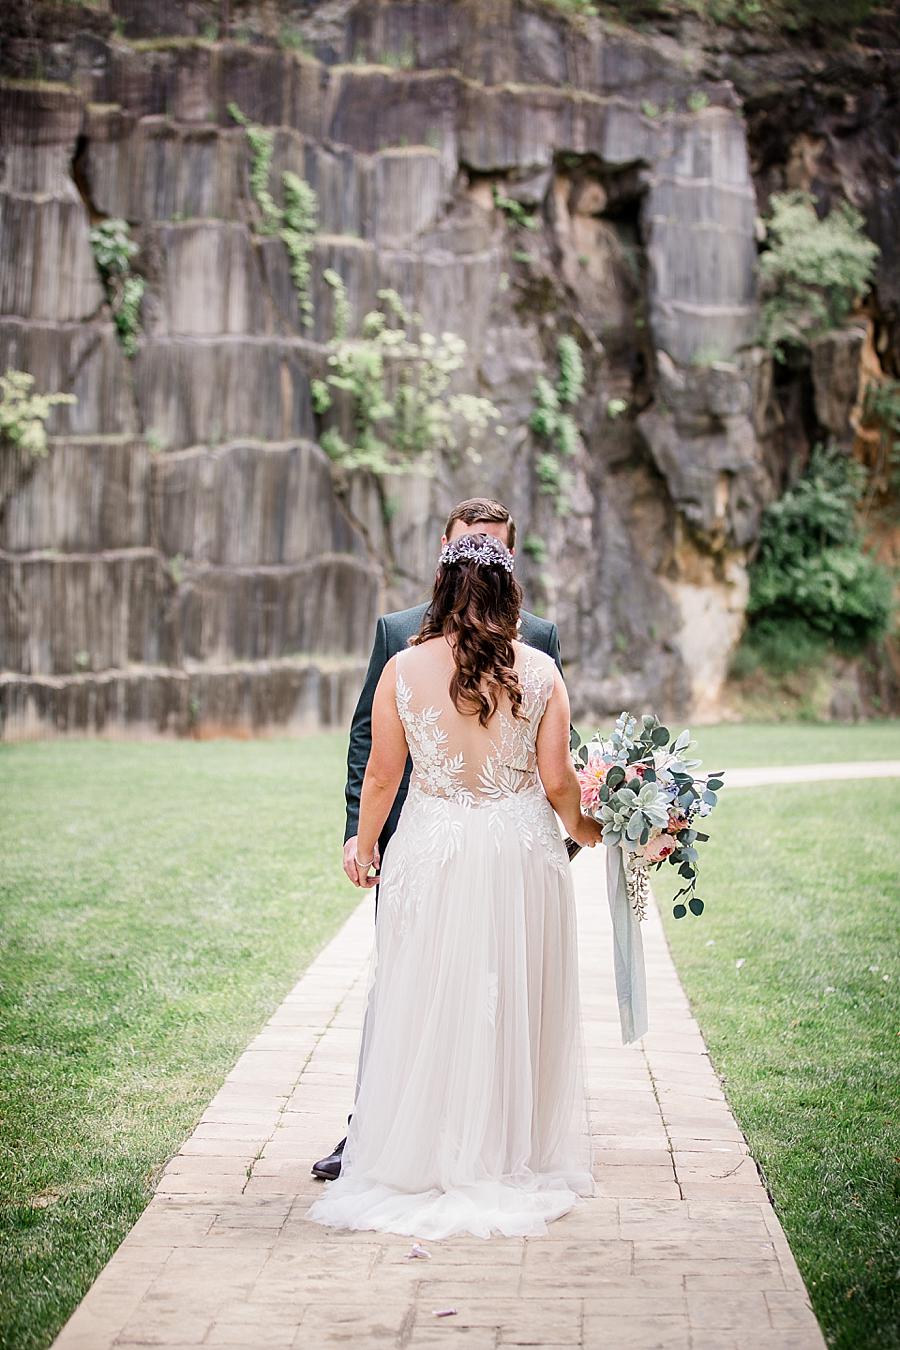 The bride from behind at this The Quarry wedding by Knoxville Wedding Photographer, Amanda May Photos.